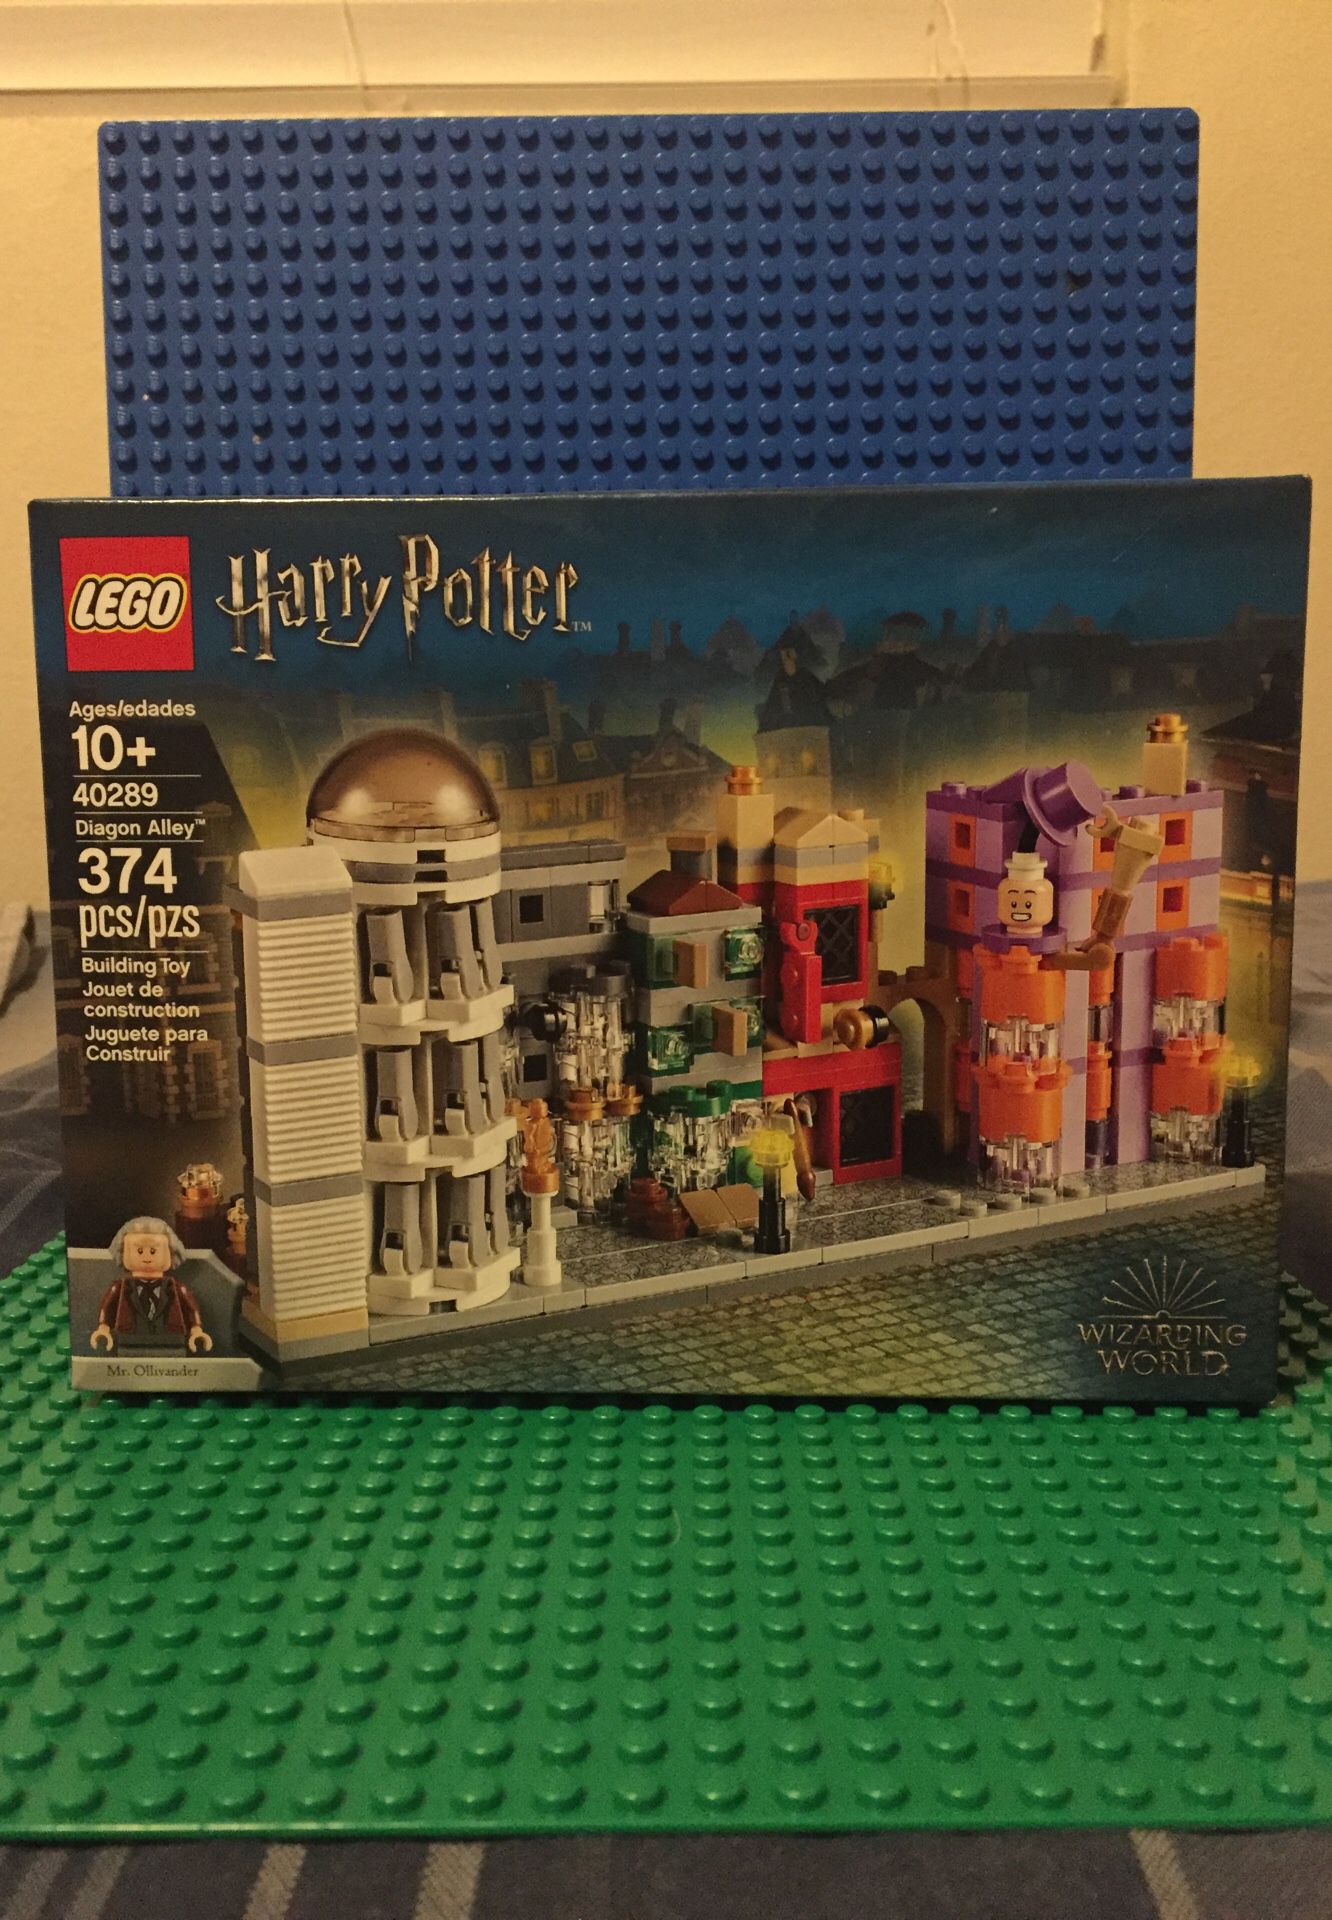 LEGO Potter Set Diagon Alley 40289 New for Sale in Fontana, - OfferUp